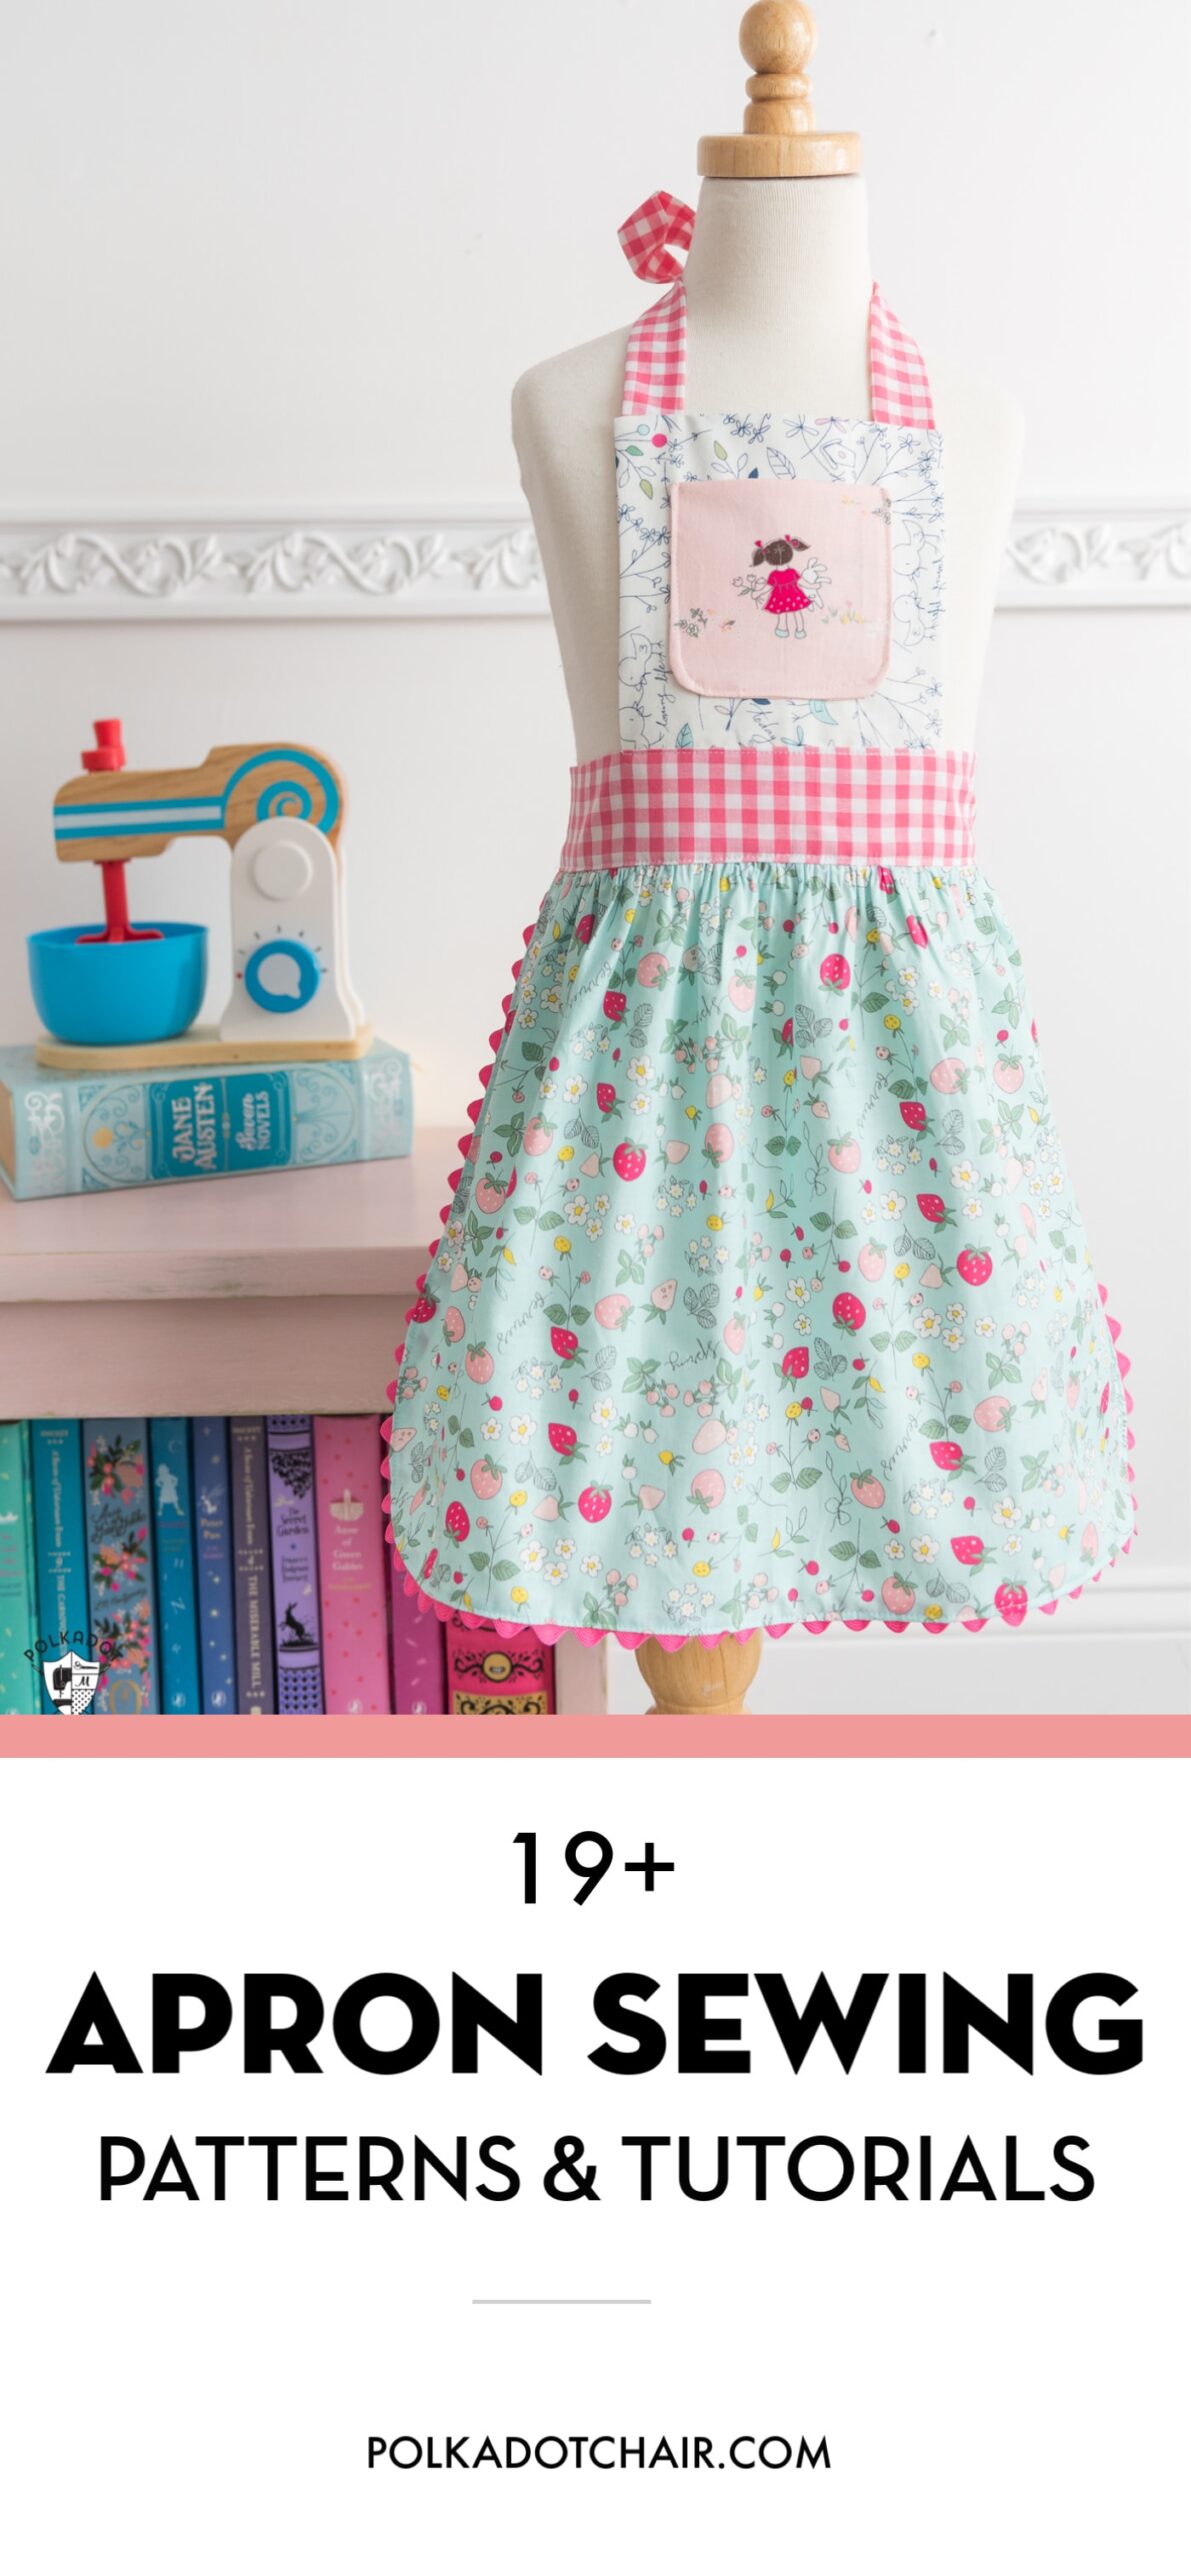 Free Patterns for Three Apron Styles - Threads